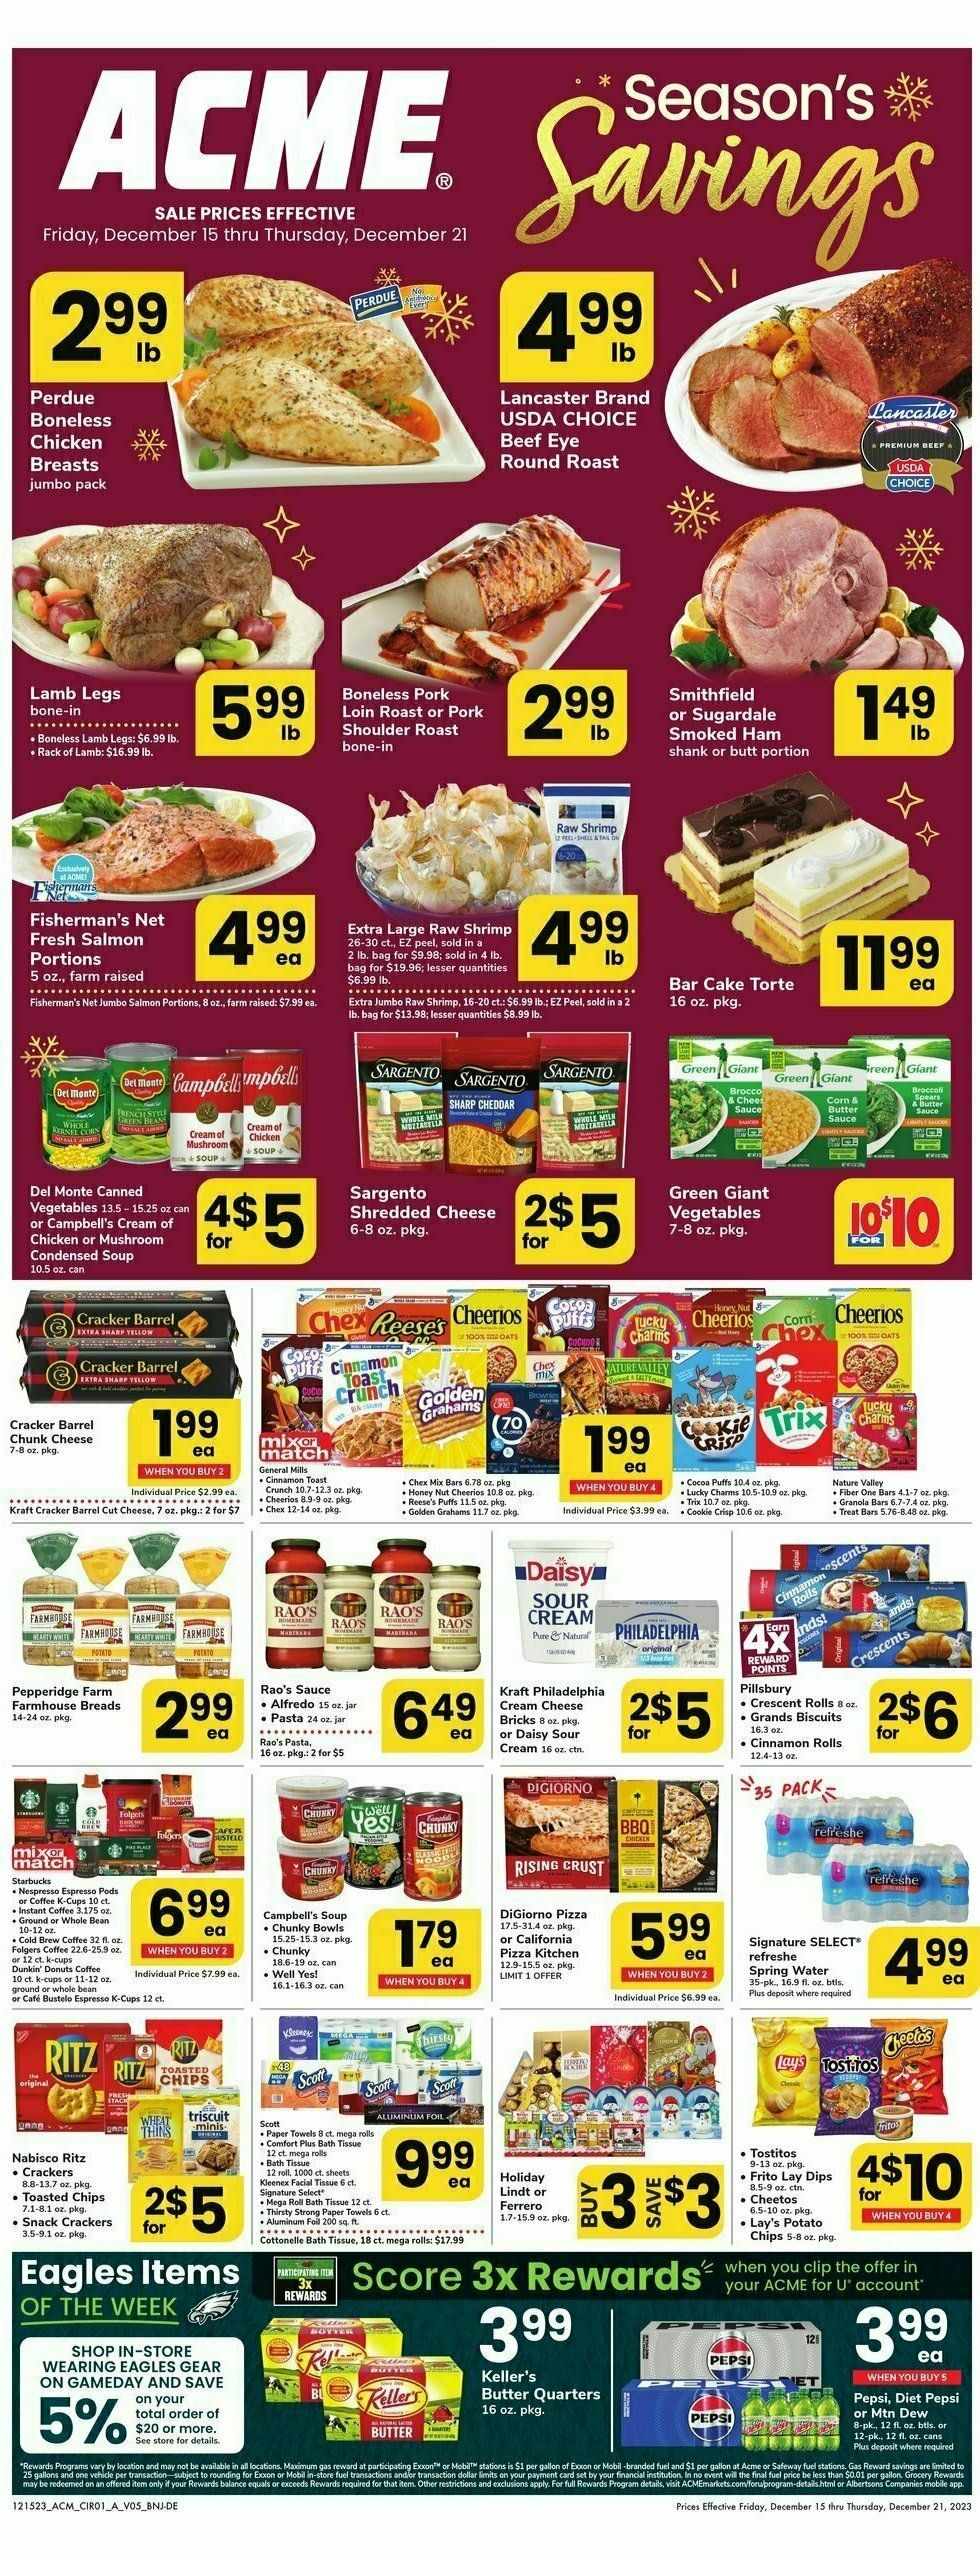 ACME Markets Weekly Ad from December 15